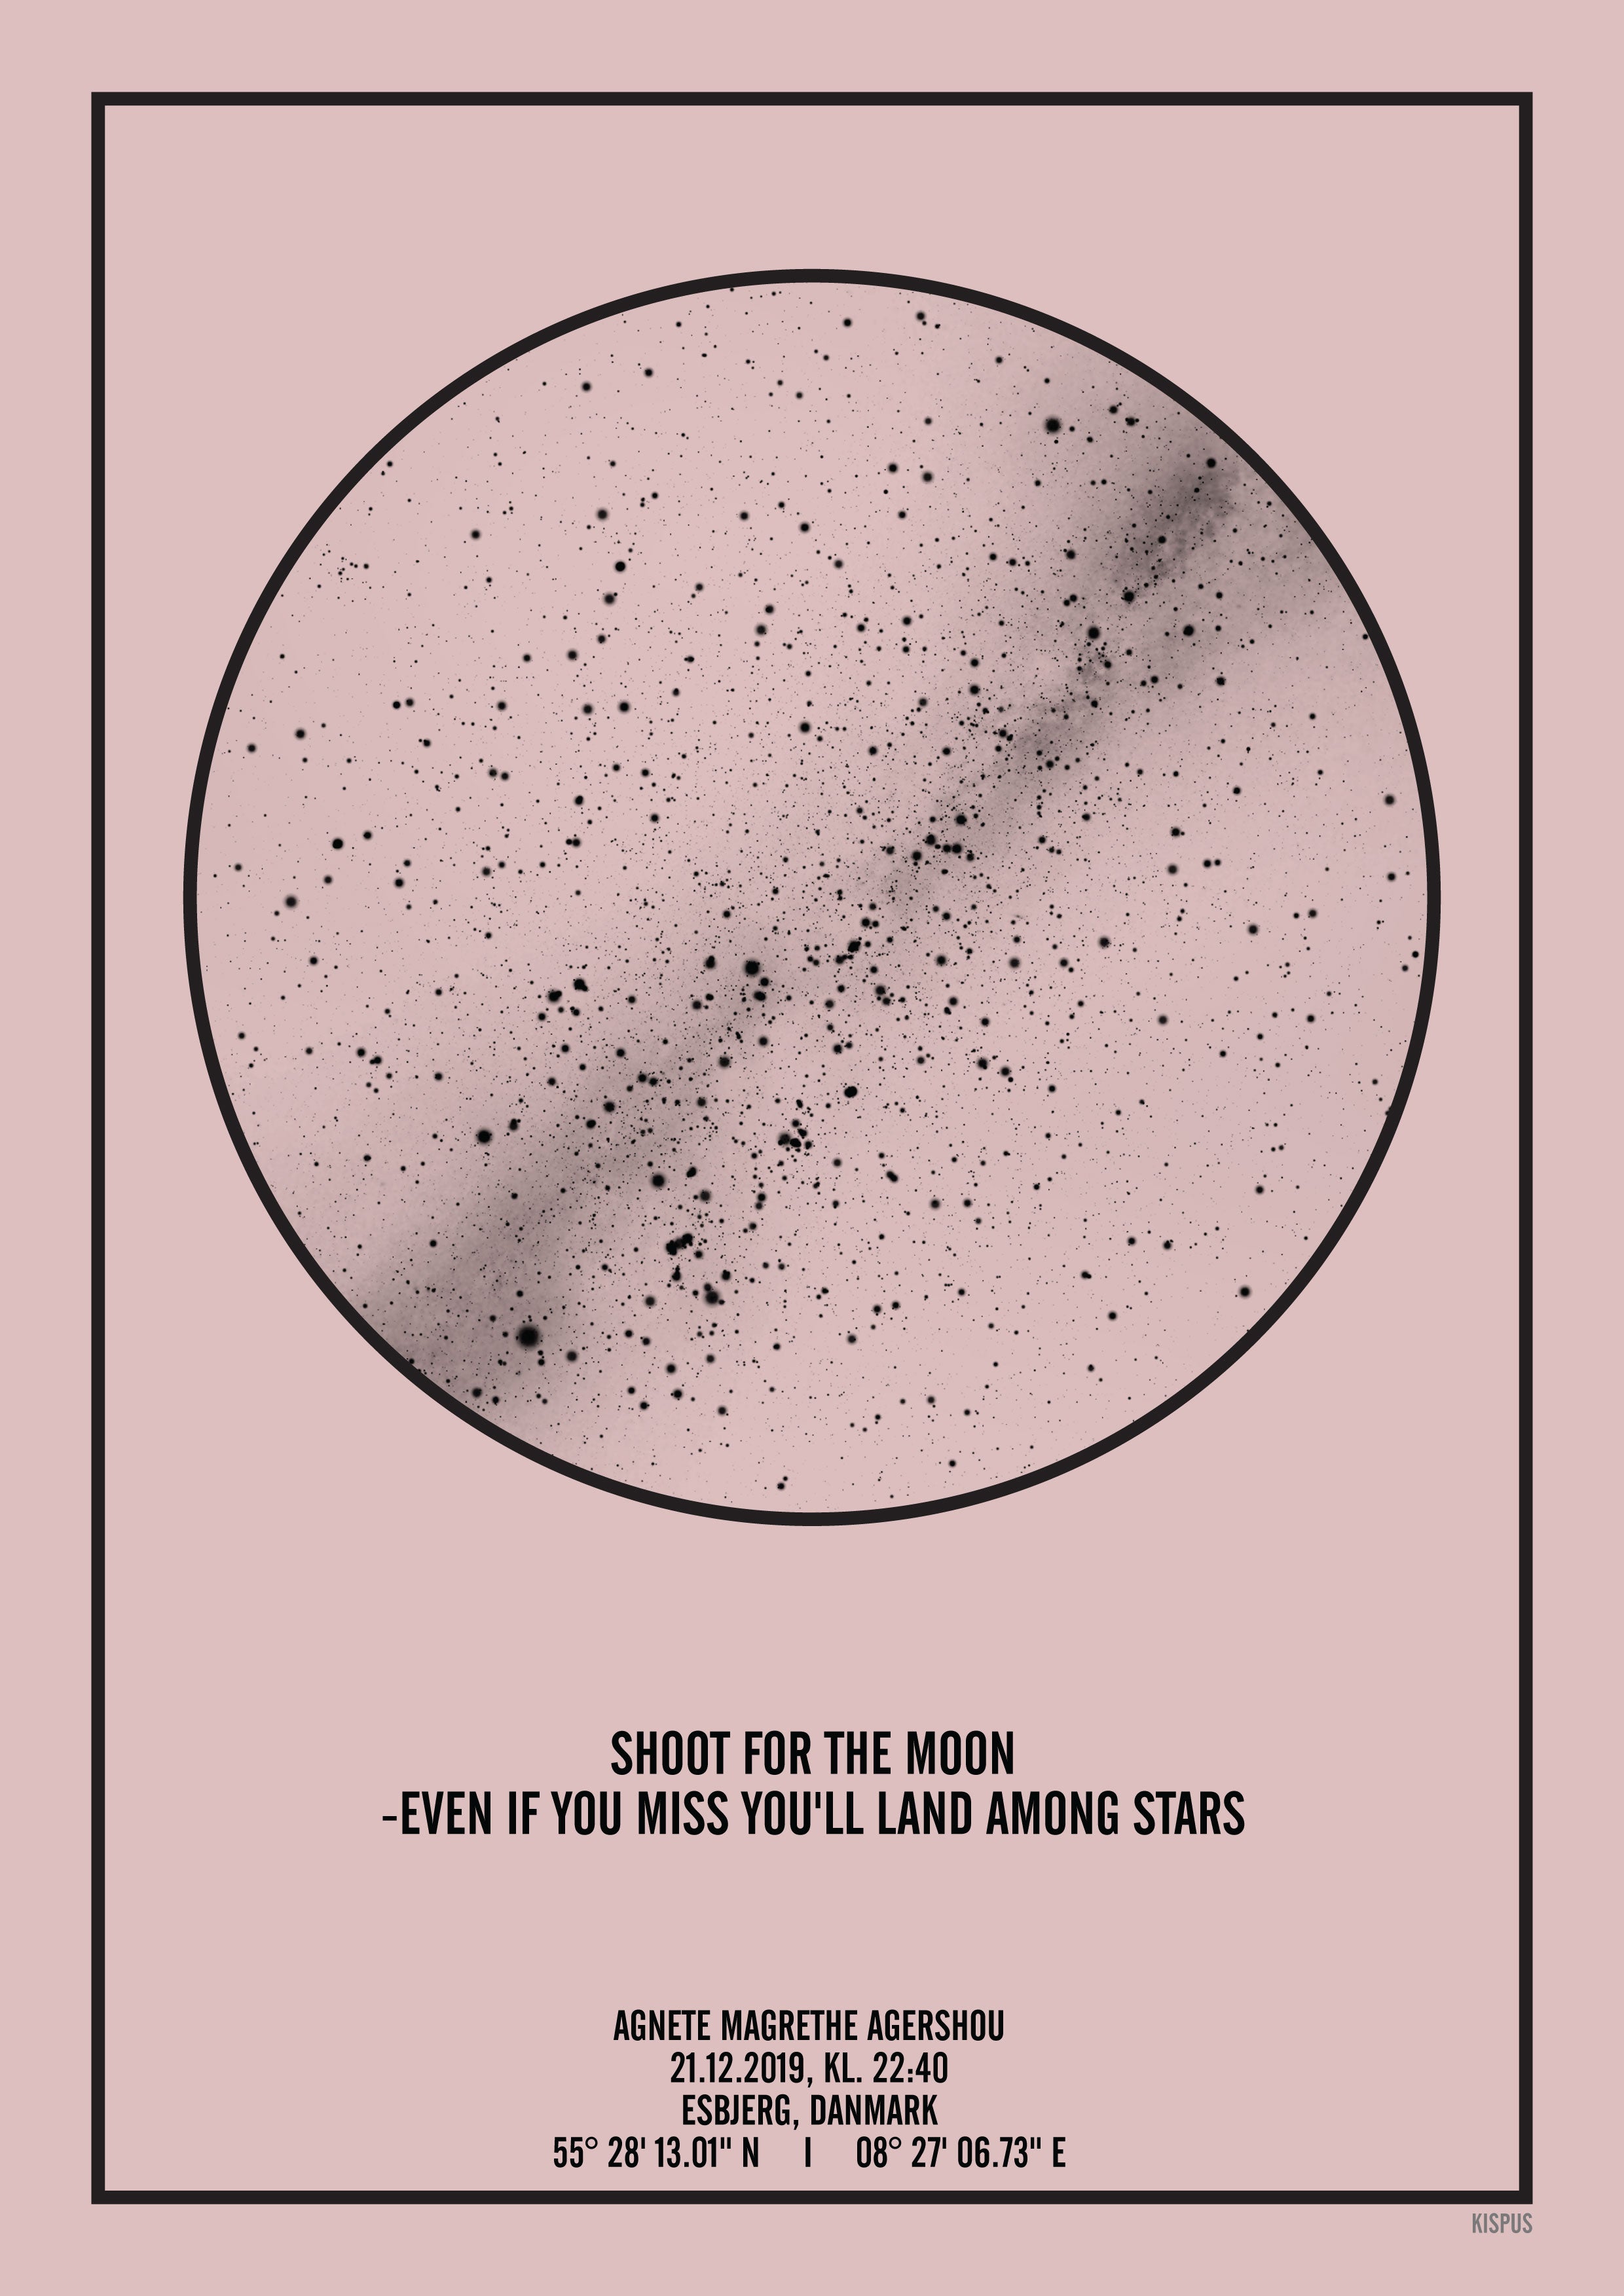 SHOOT FOR THE MOON -EVEN IF YOU MISS YOU'LL LAND AMONG STARS plakat